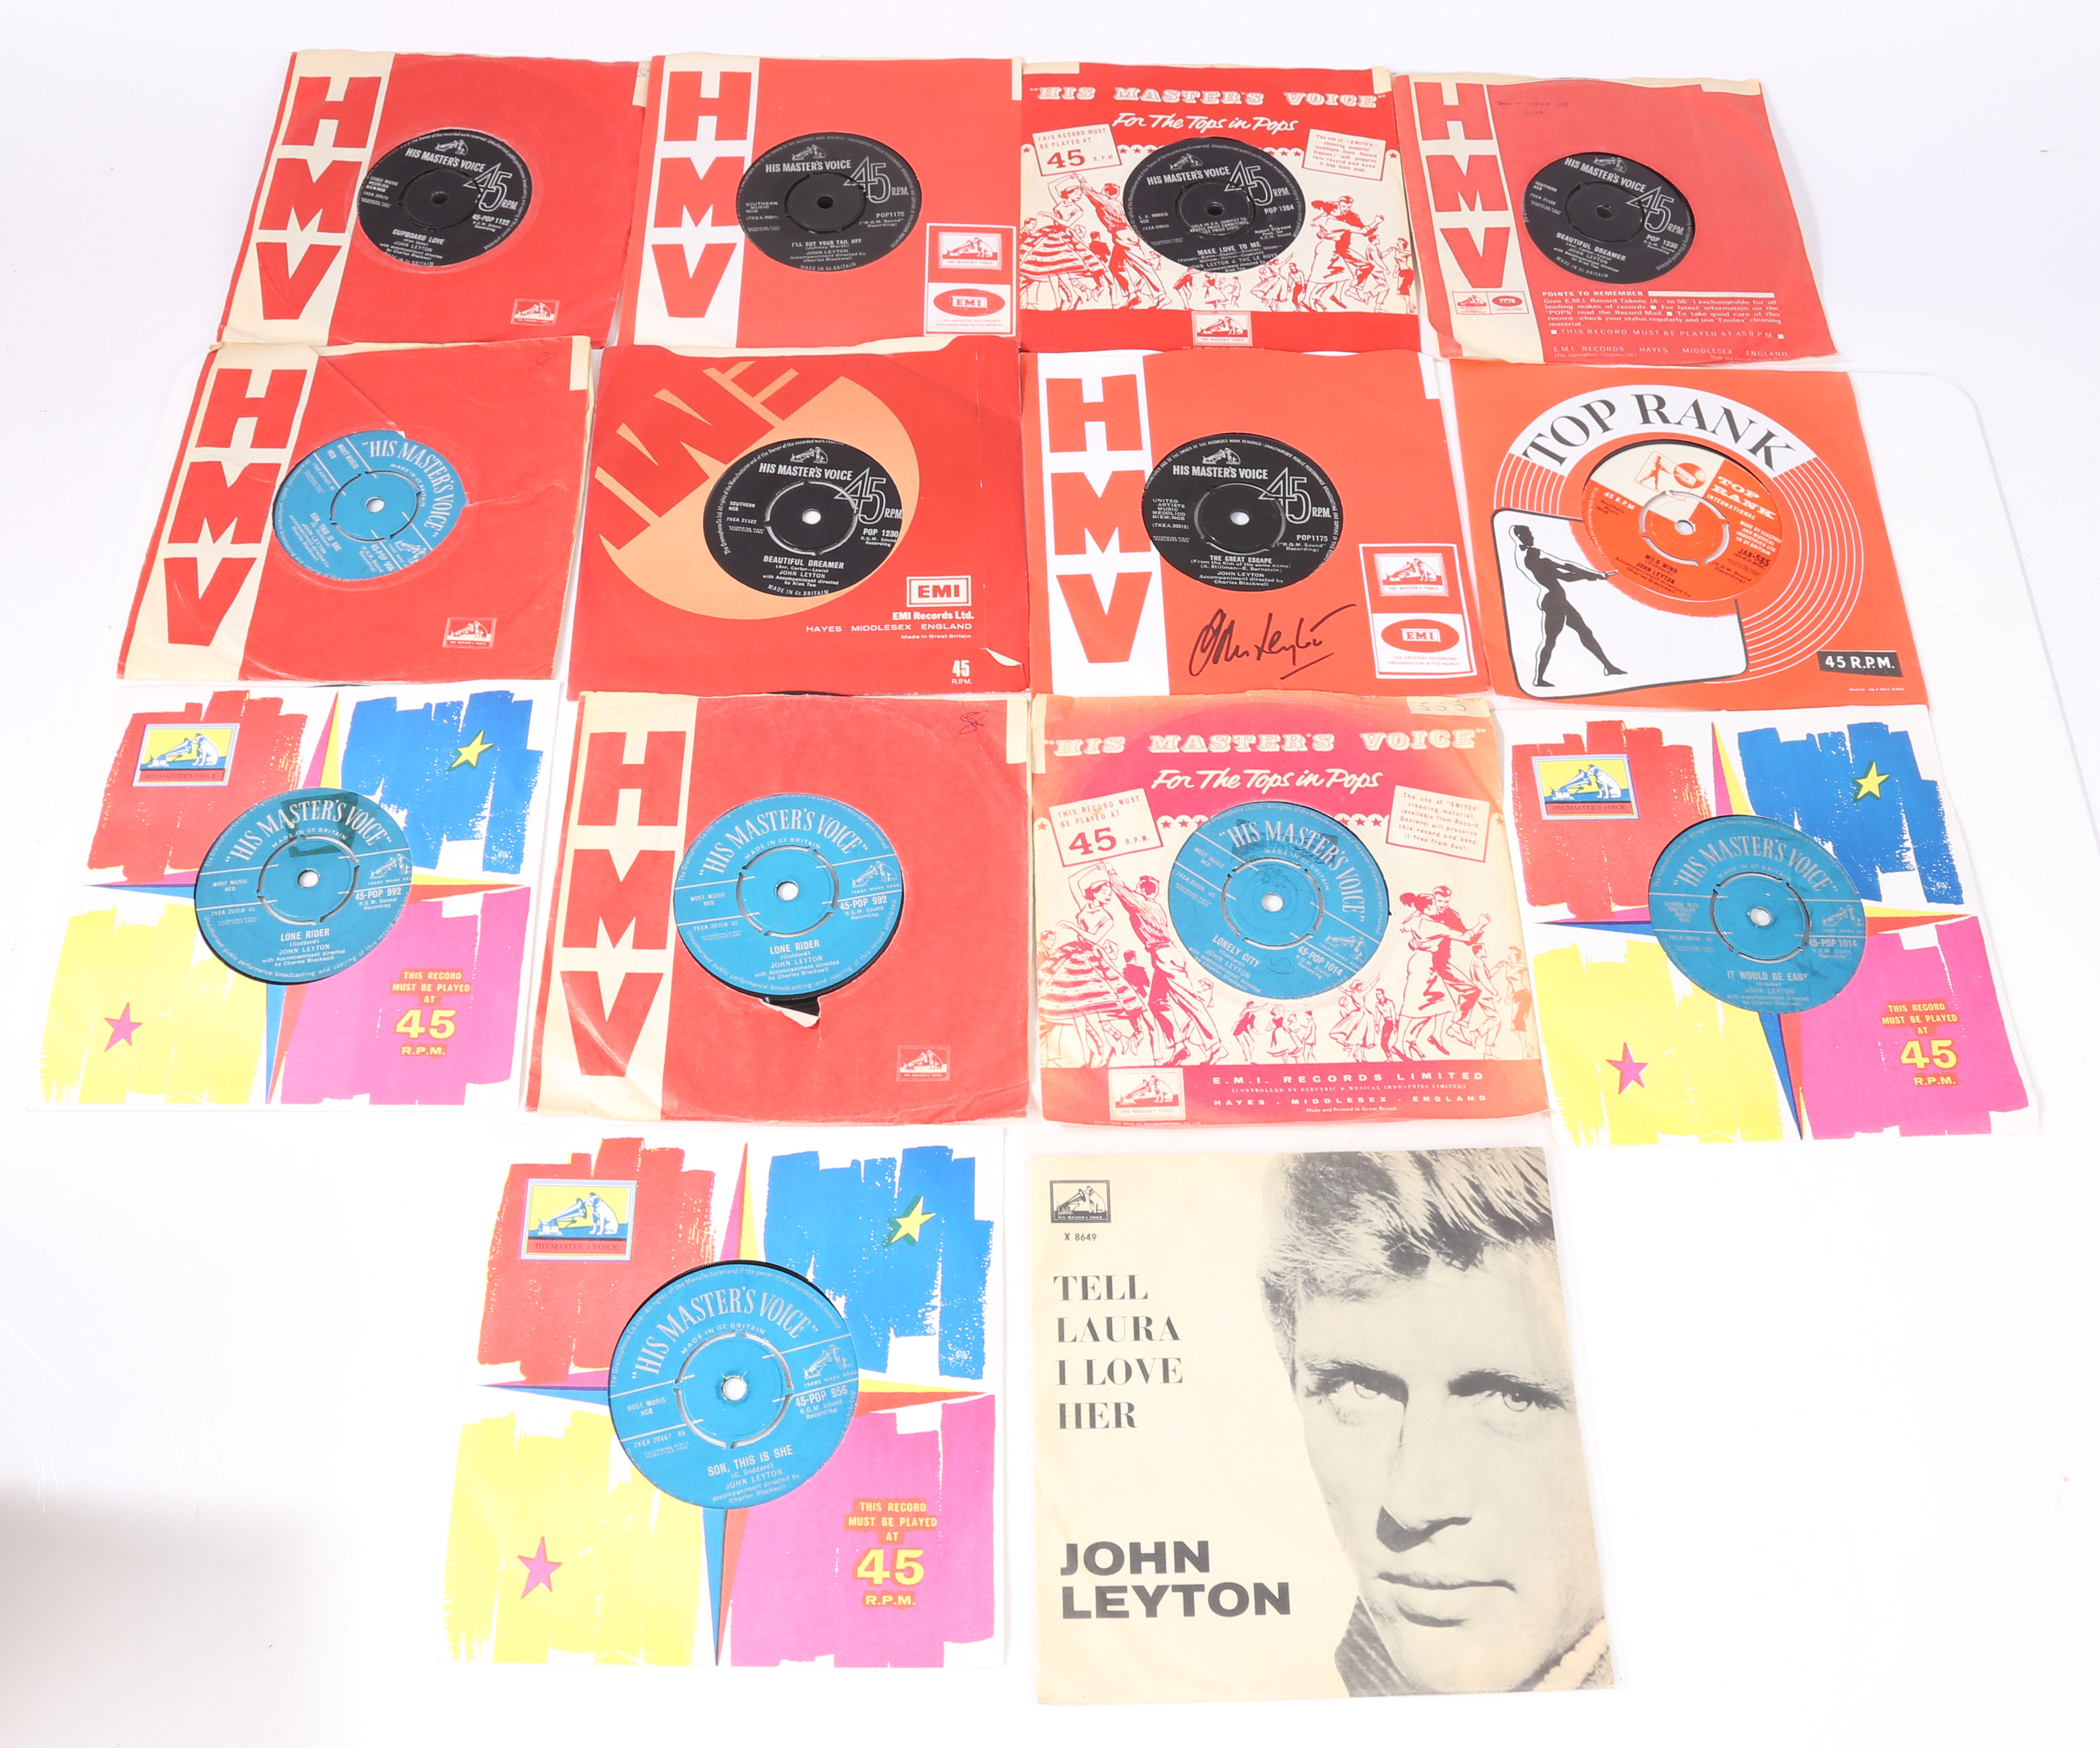 John Leyton. A collection of LPs, 45s, DVDs, and memorabilia relating to the music career of John - Image 28 of 32